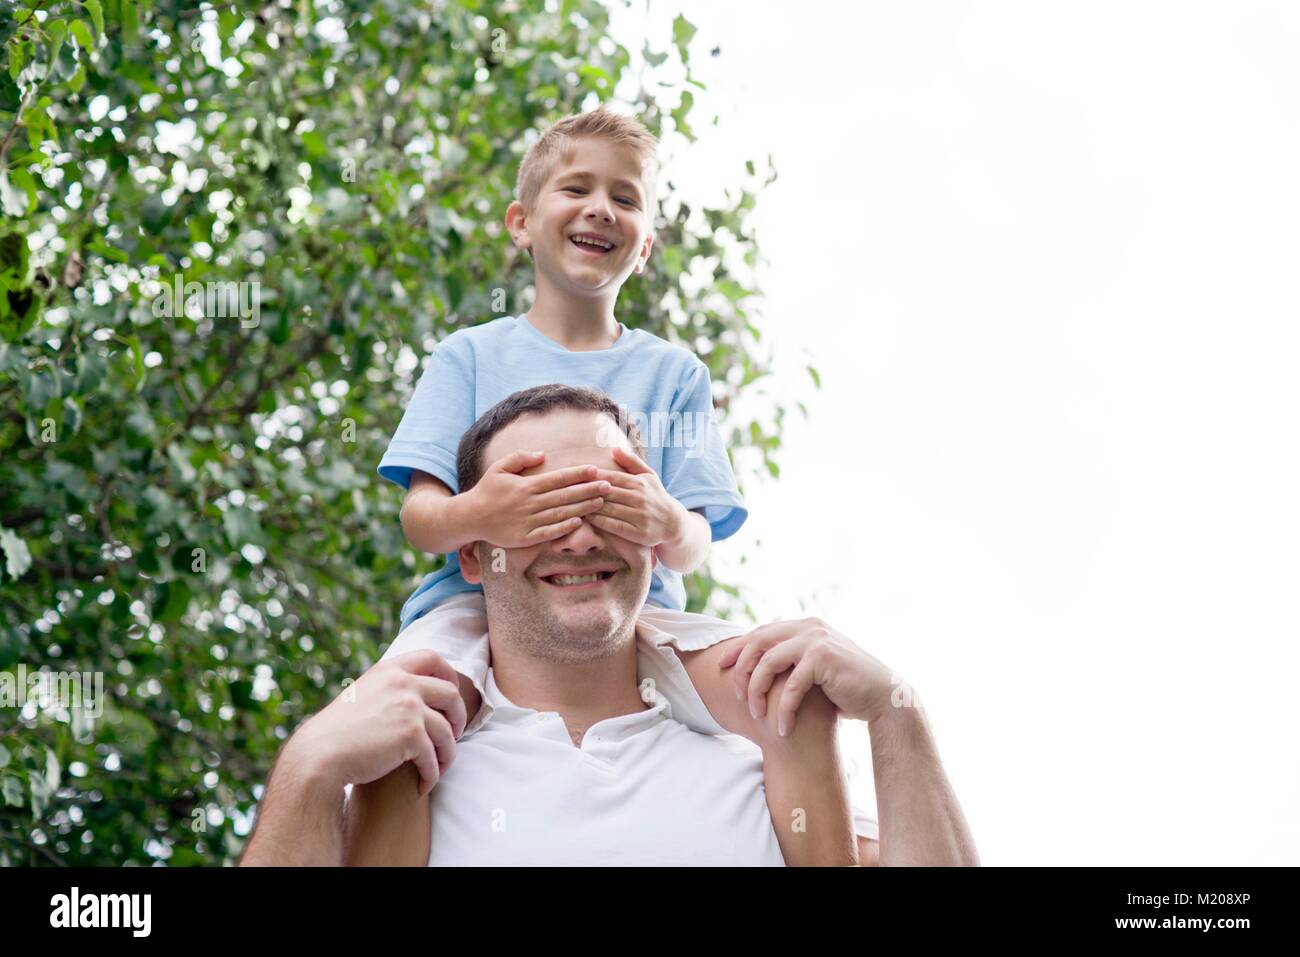 Father carrying son on his shoulders. Stock Photo